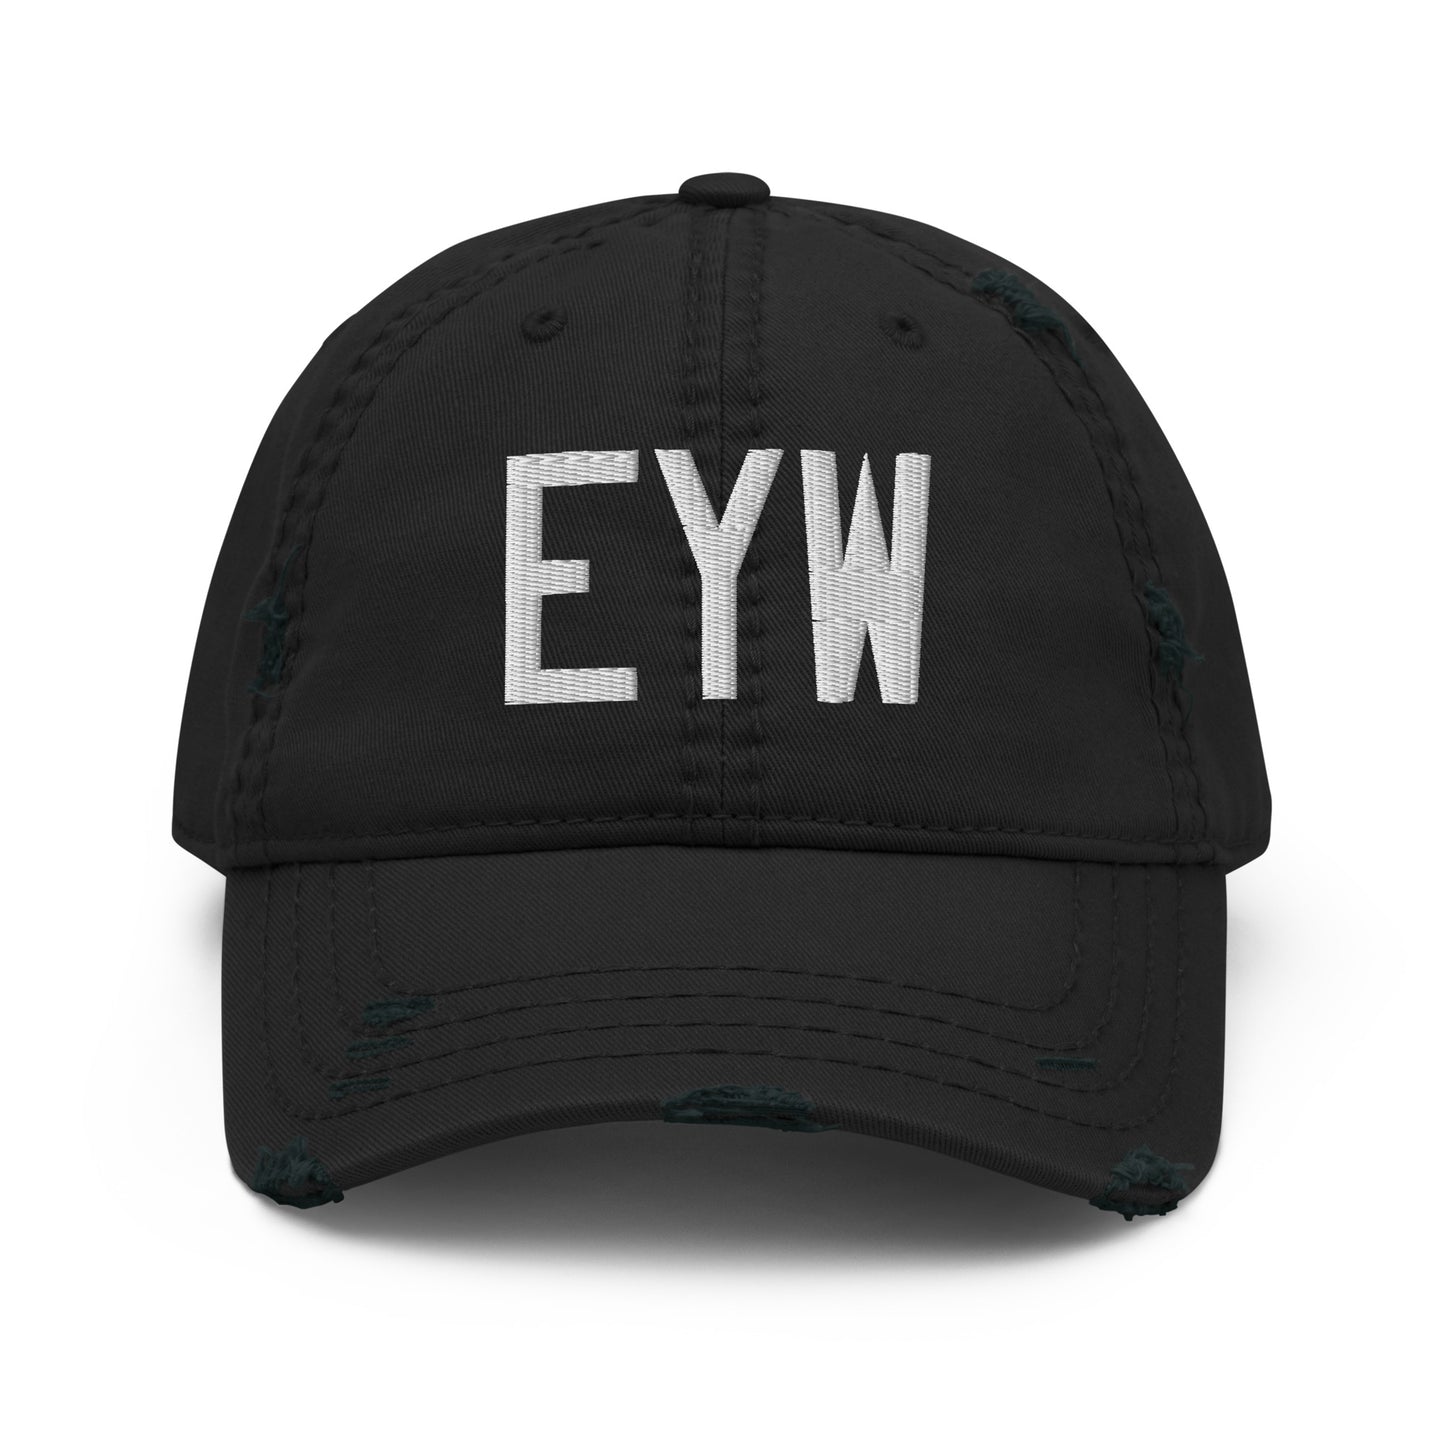 Airport Code Distressed Hat - White • EYW Key West • YHM Designs - Image 10